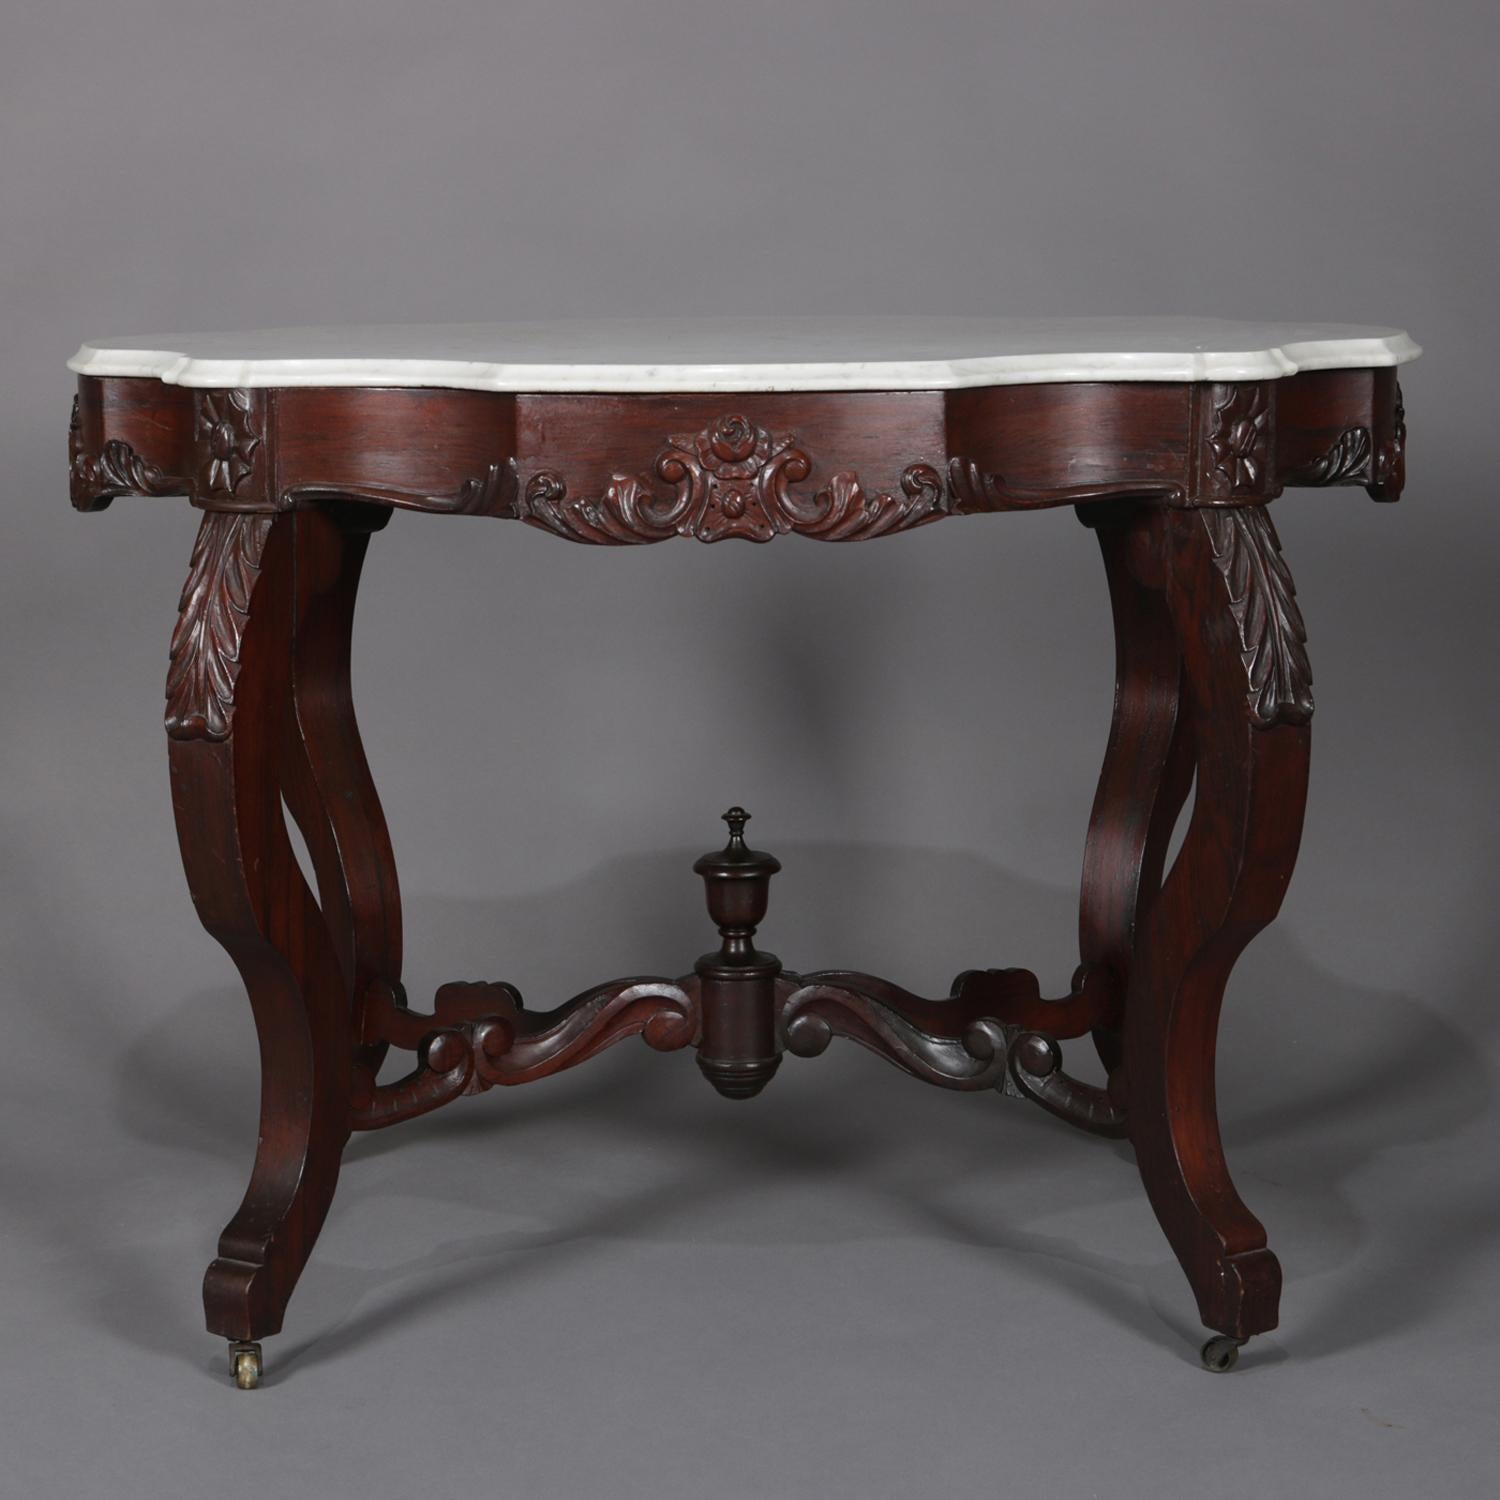 Beveled Antique High Victorian Carved Walnut and Marble Turtle Top Centre Table